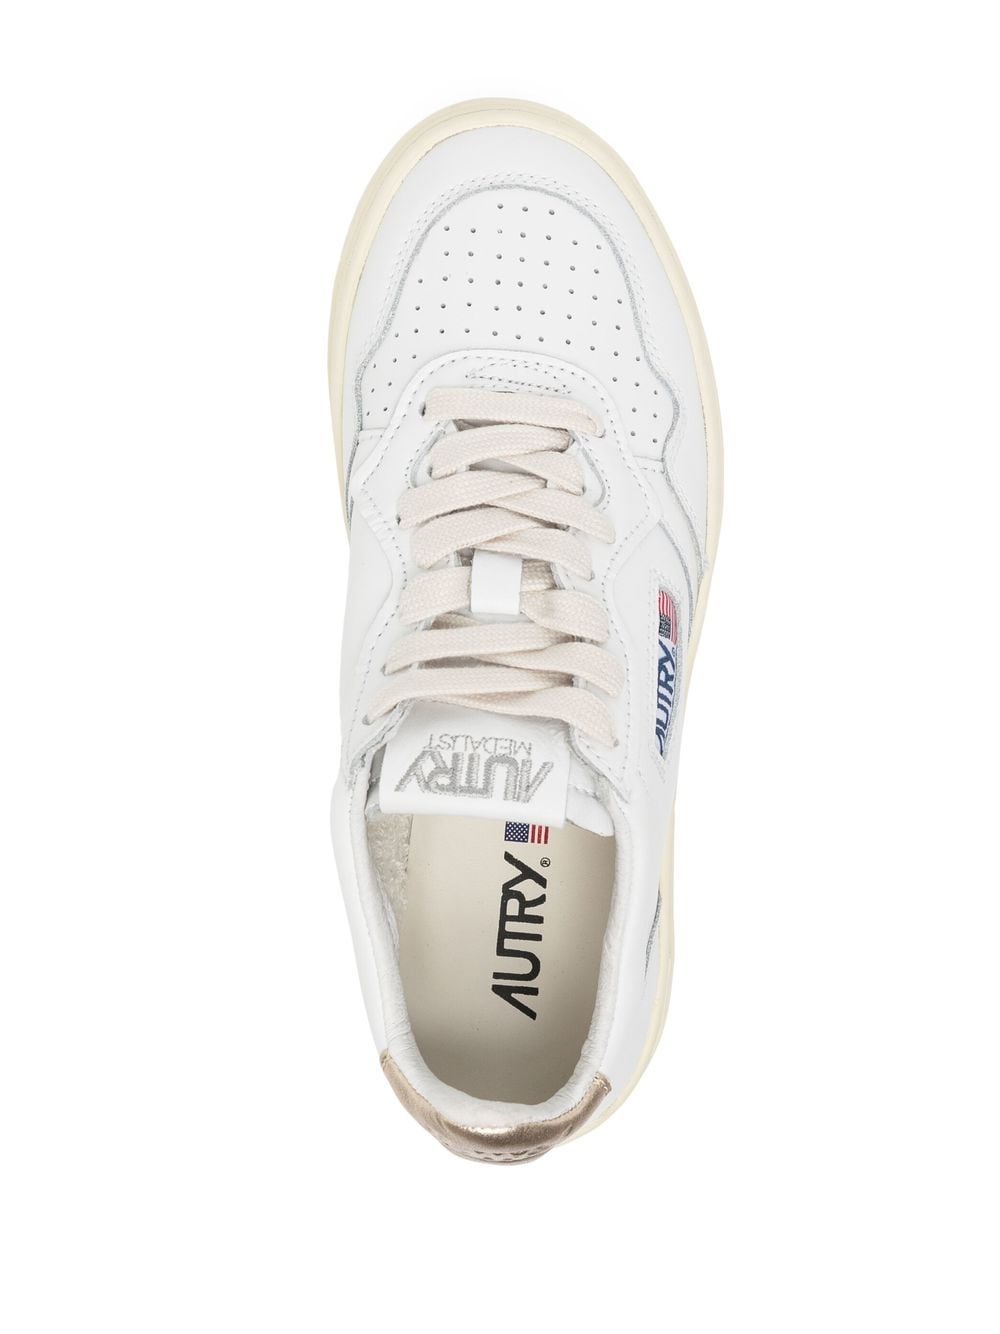 Autry - Medalist leather sneakers - White Metallic